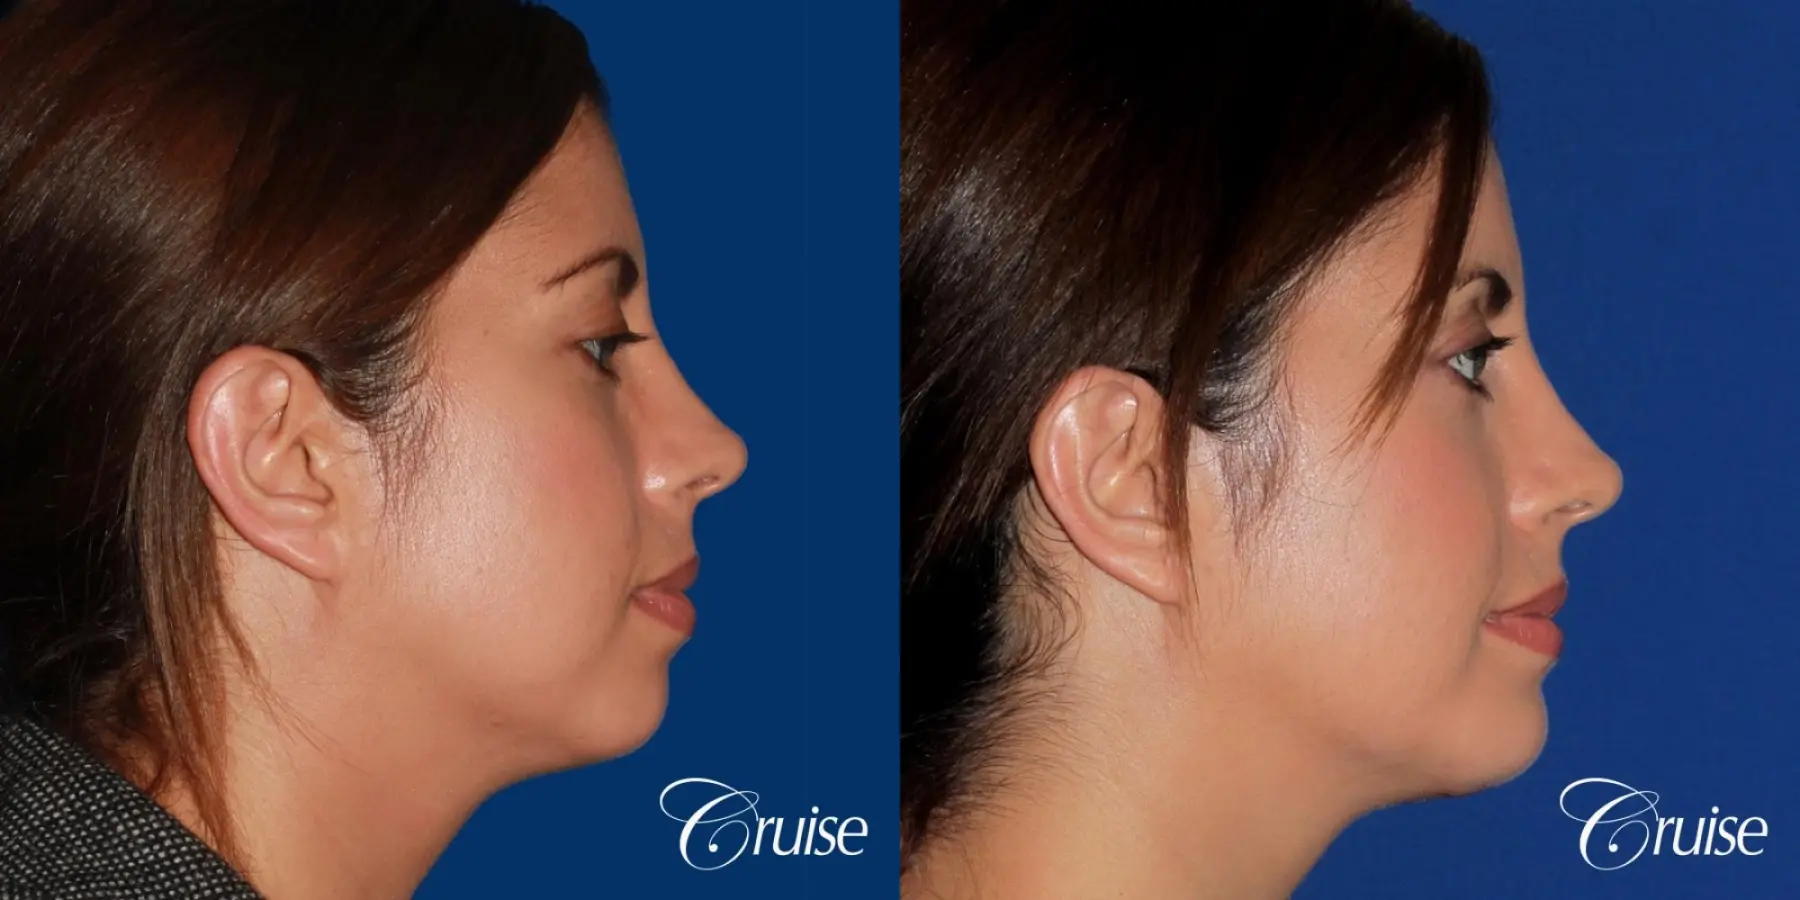 woman with large anatomic chin implant - Before and After 3